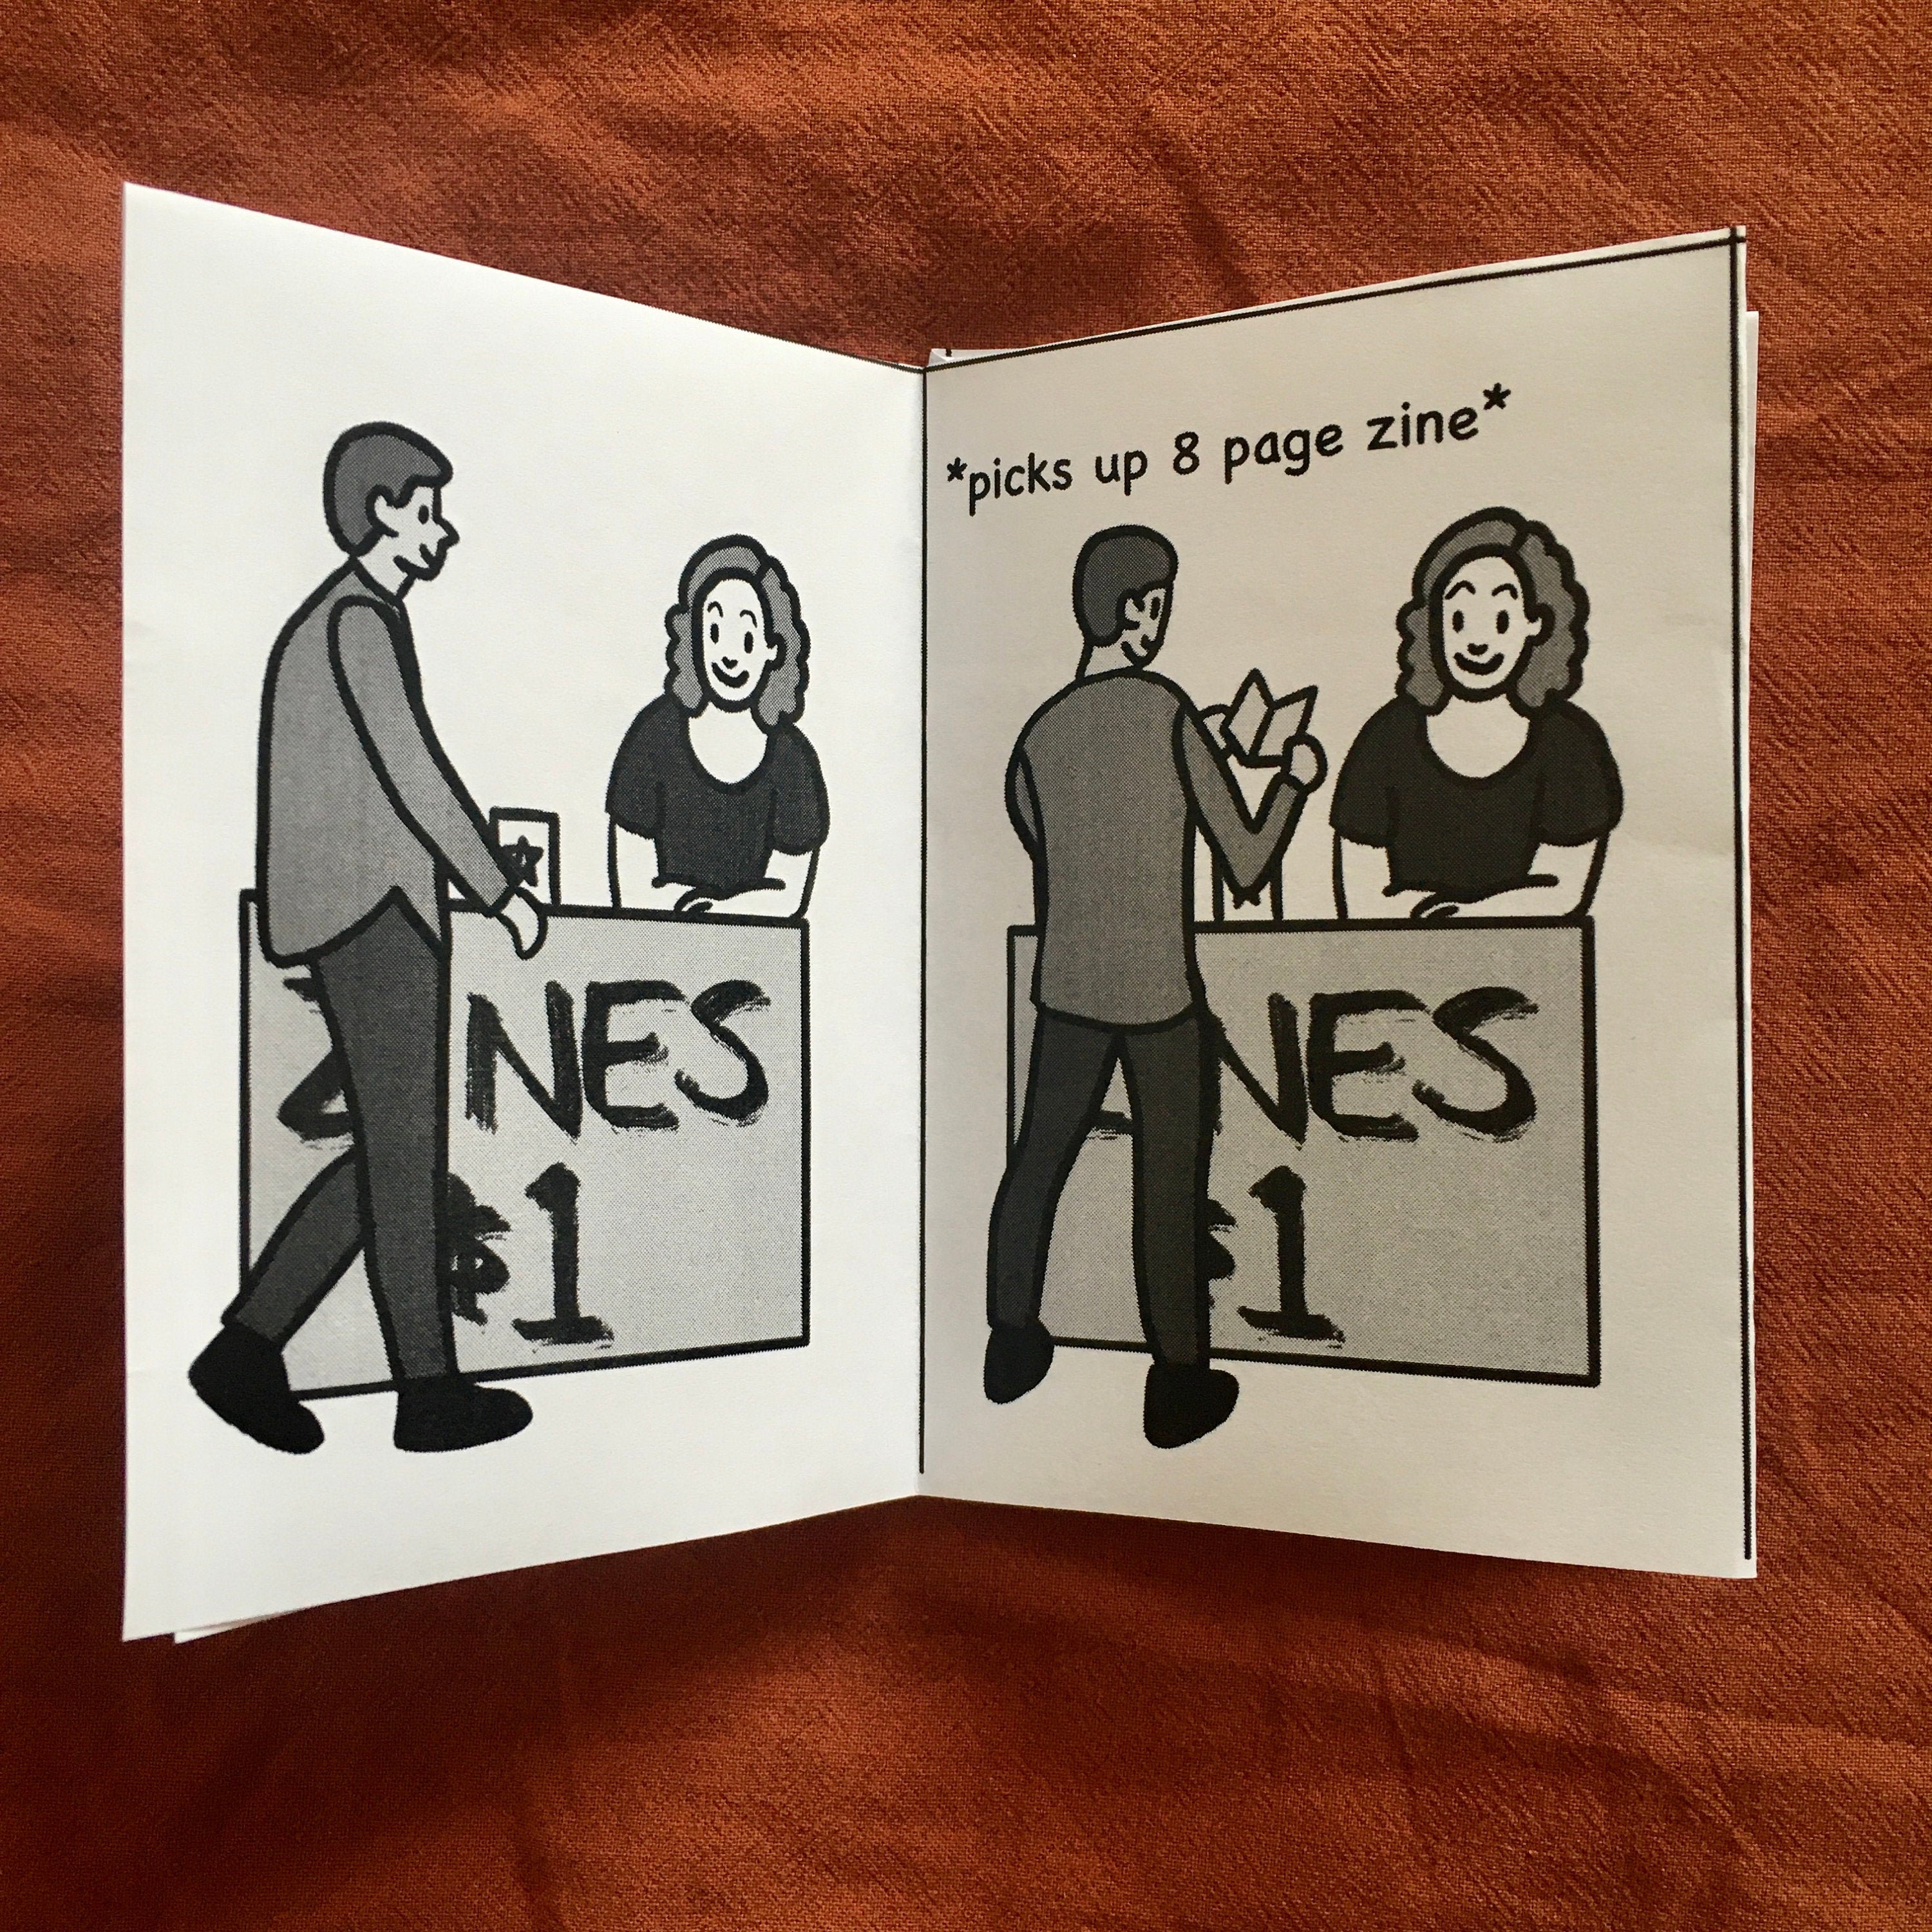 What It’s Like To Sell Zines!